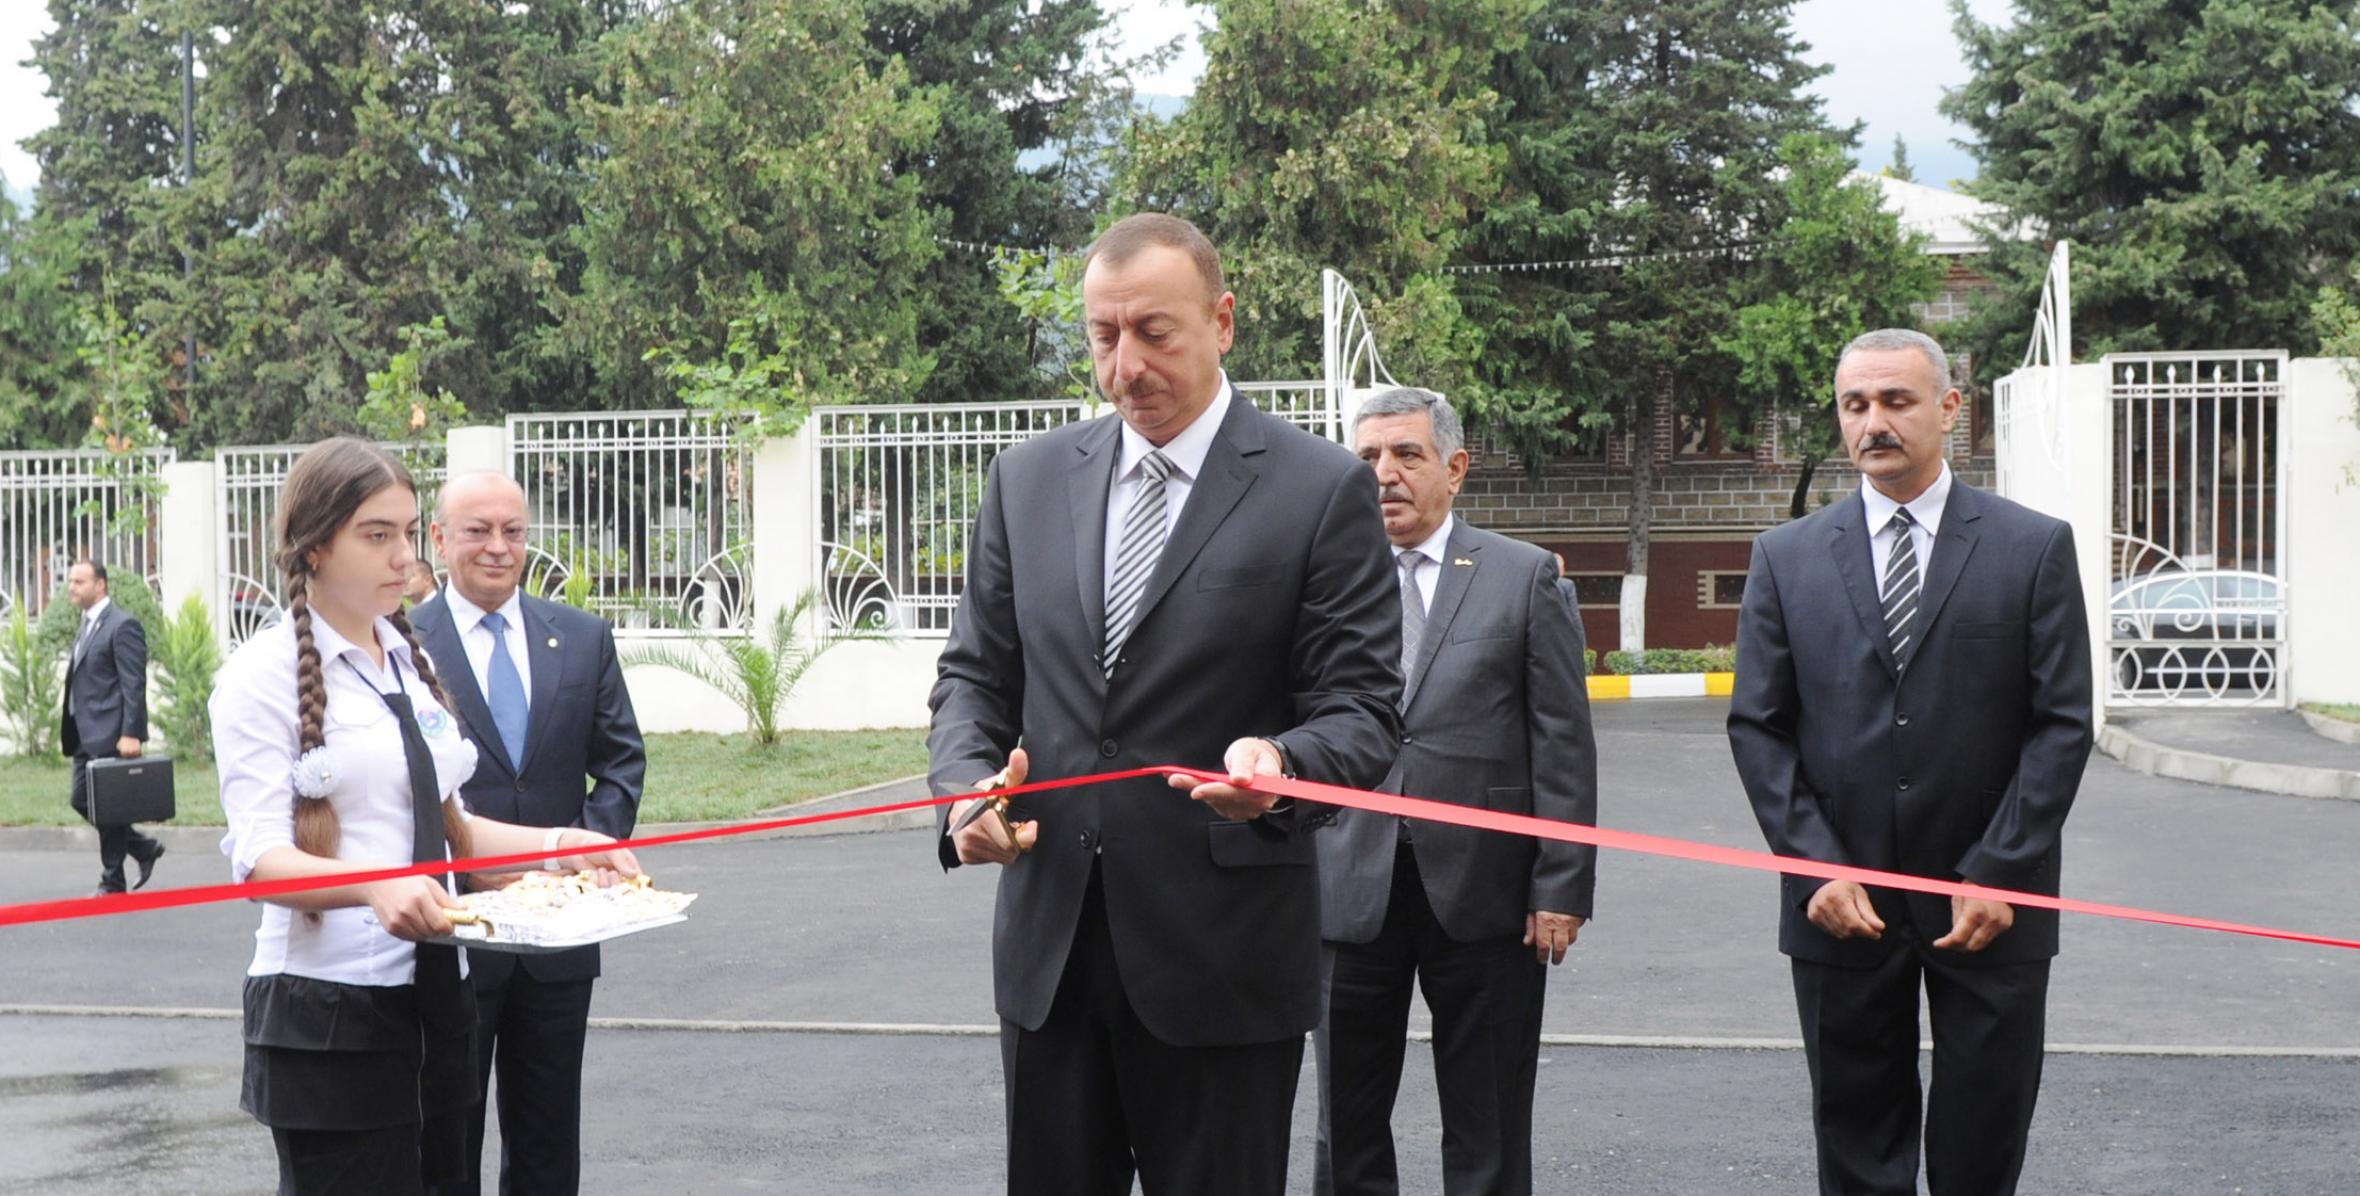 Ilham Aliyev attended the opening of secondary school No 2 in Zagatala